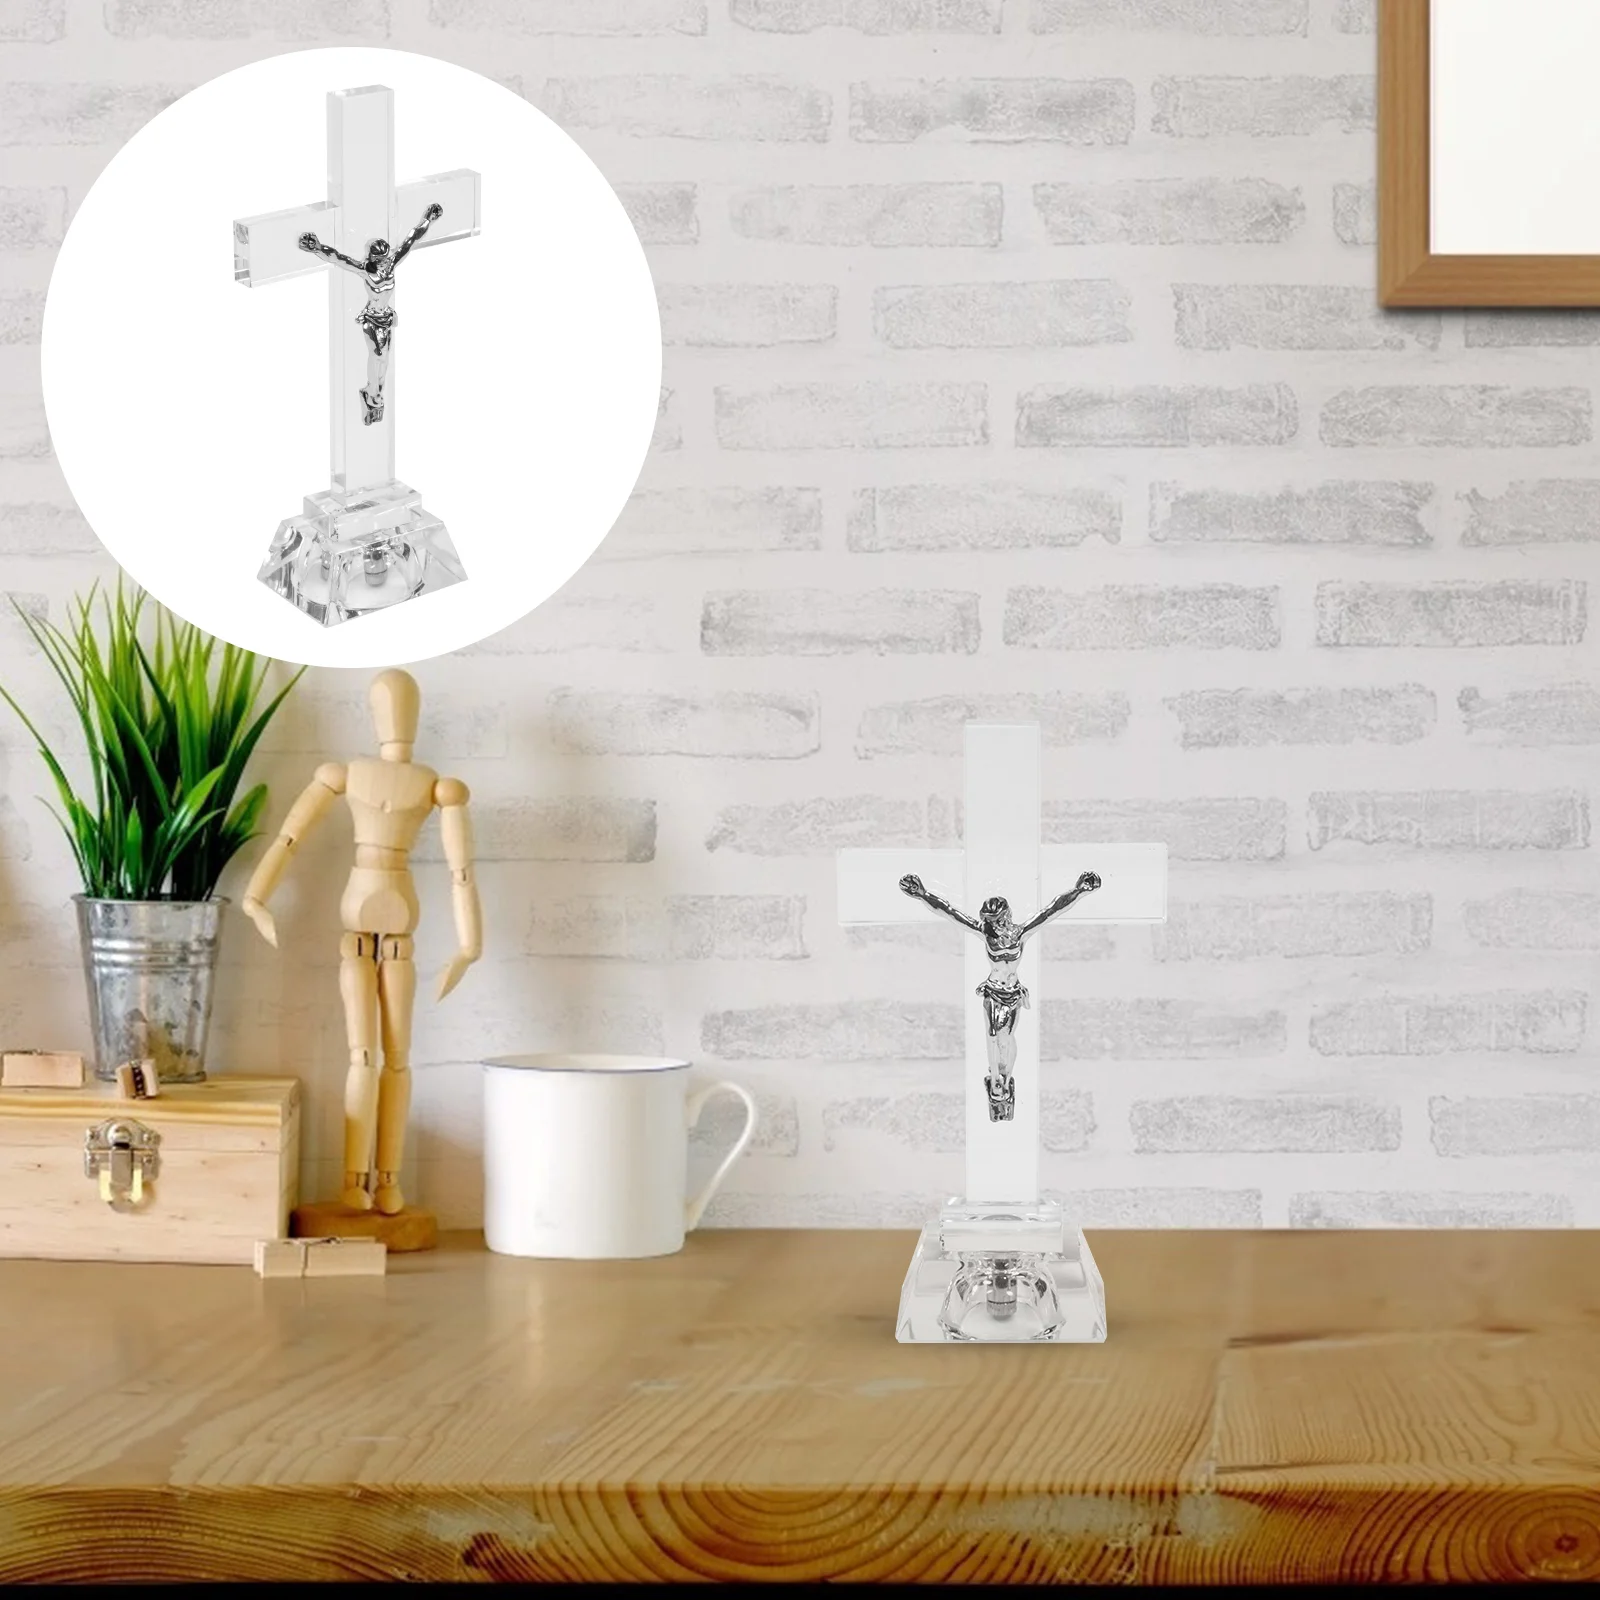 

Crystal Decorative Lamp Prayer Supplies Adornment Religious Decorate Home Office Decor Figurine Chic Gift